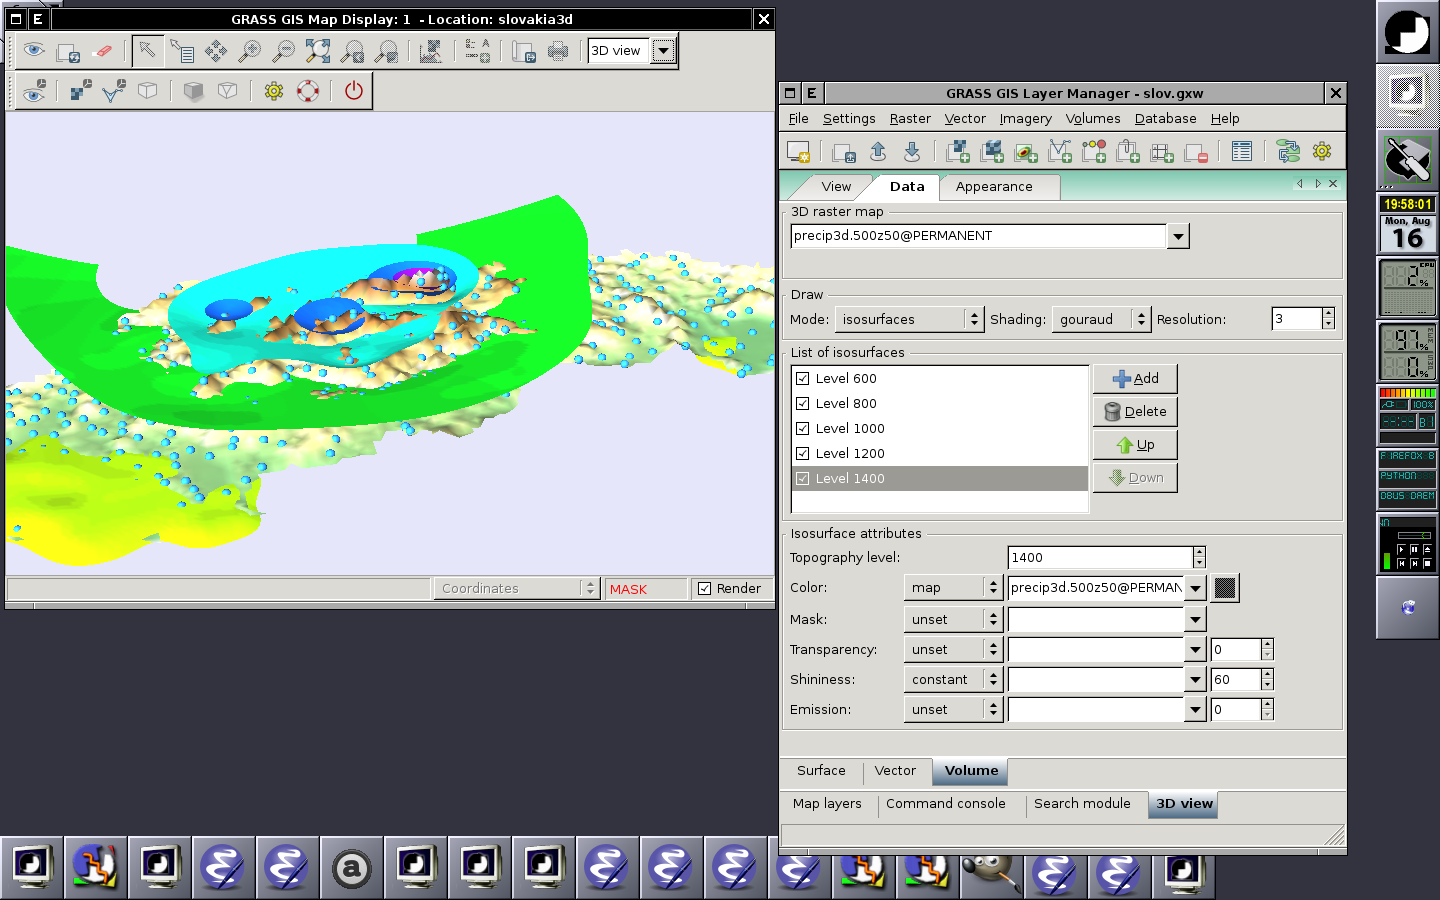 wxGUI: Displaying raster (surface), 2D vector and 3D raster (volume) in the 3D space